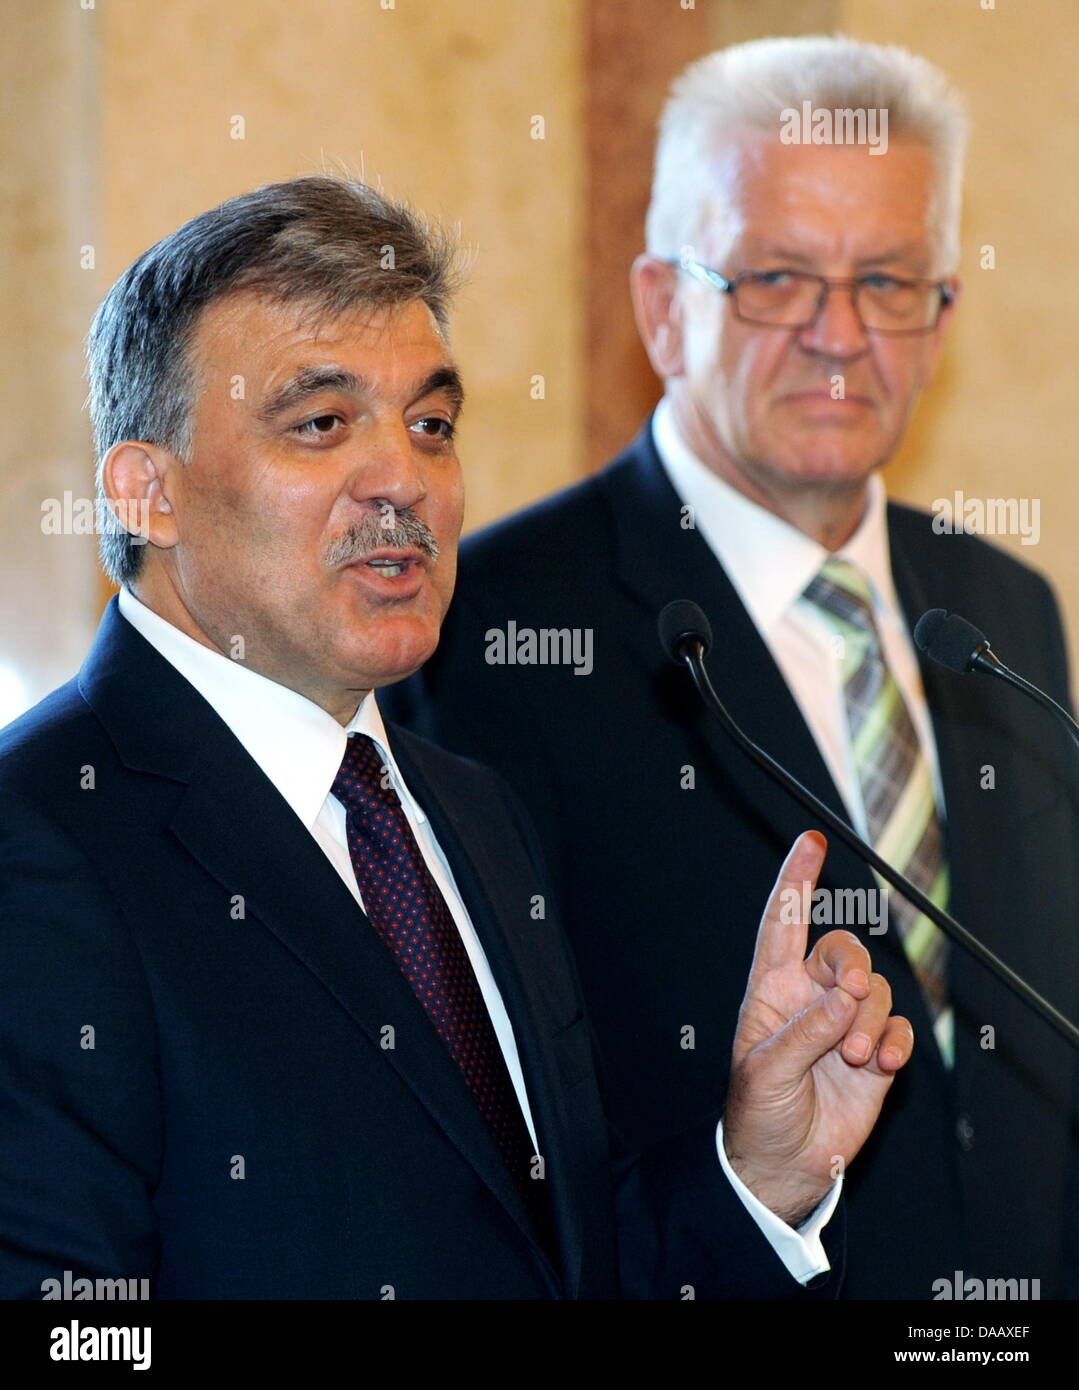 The Turkish President Abdullah Gul (L) speaks next to the Prime Minister of Baden-Wuerttemberg Winfried Kretschmann (R) inside the New Palace in Stuttgart, Germany, 21 September 2011. Gul visited Stuttgart during his three-day-visit to Germany. Photo: BERND WEISSBROD Stock Photo